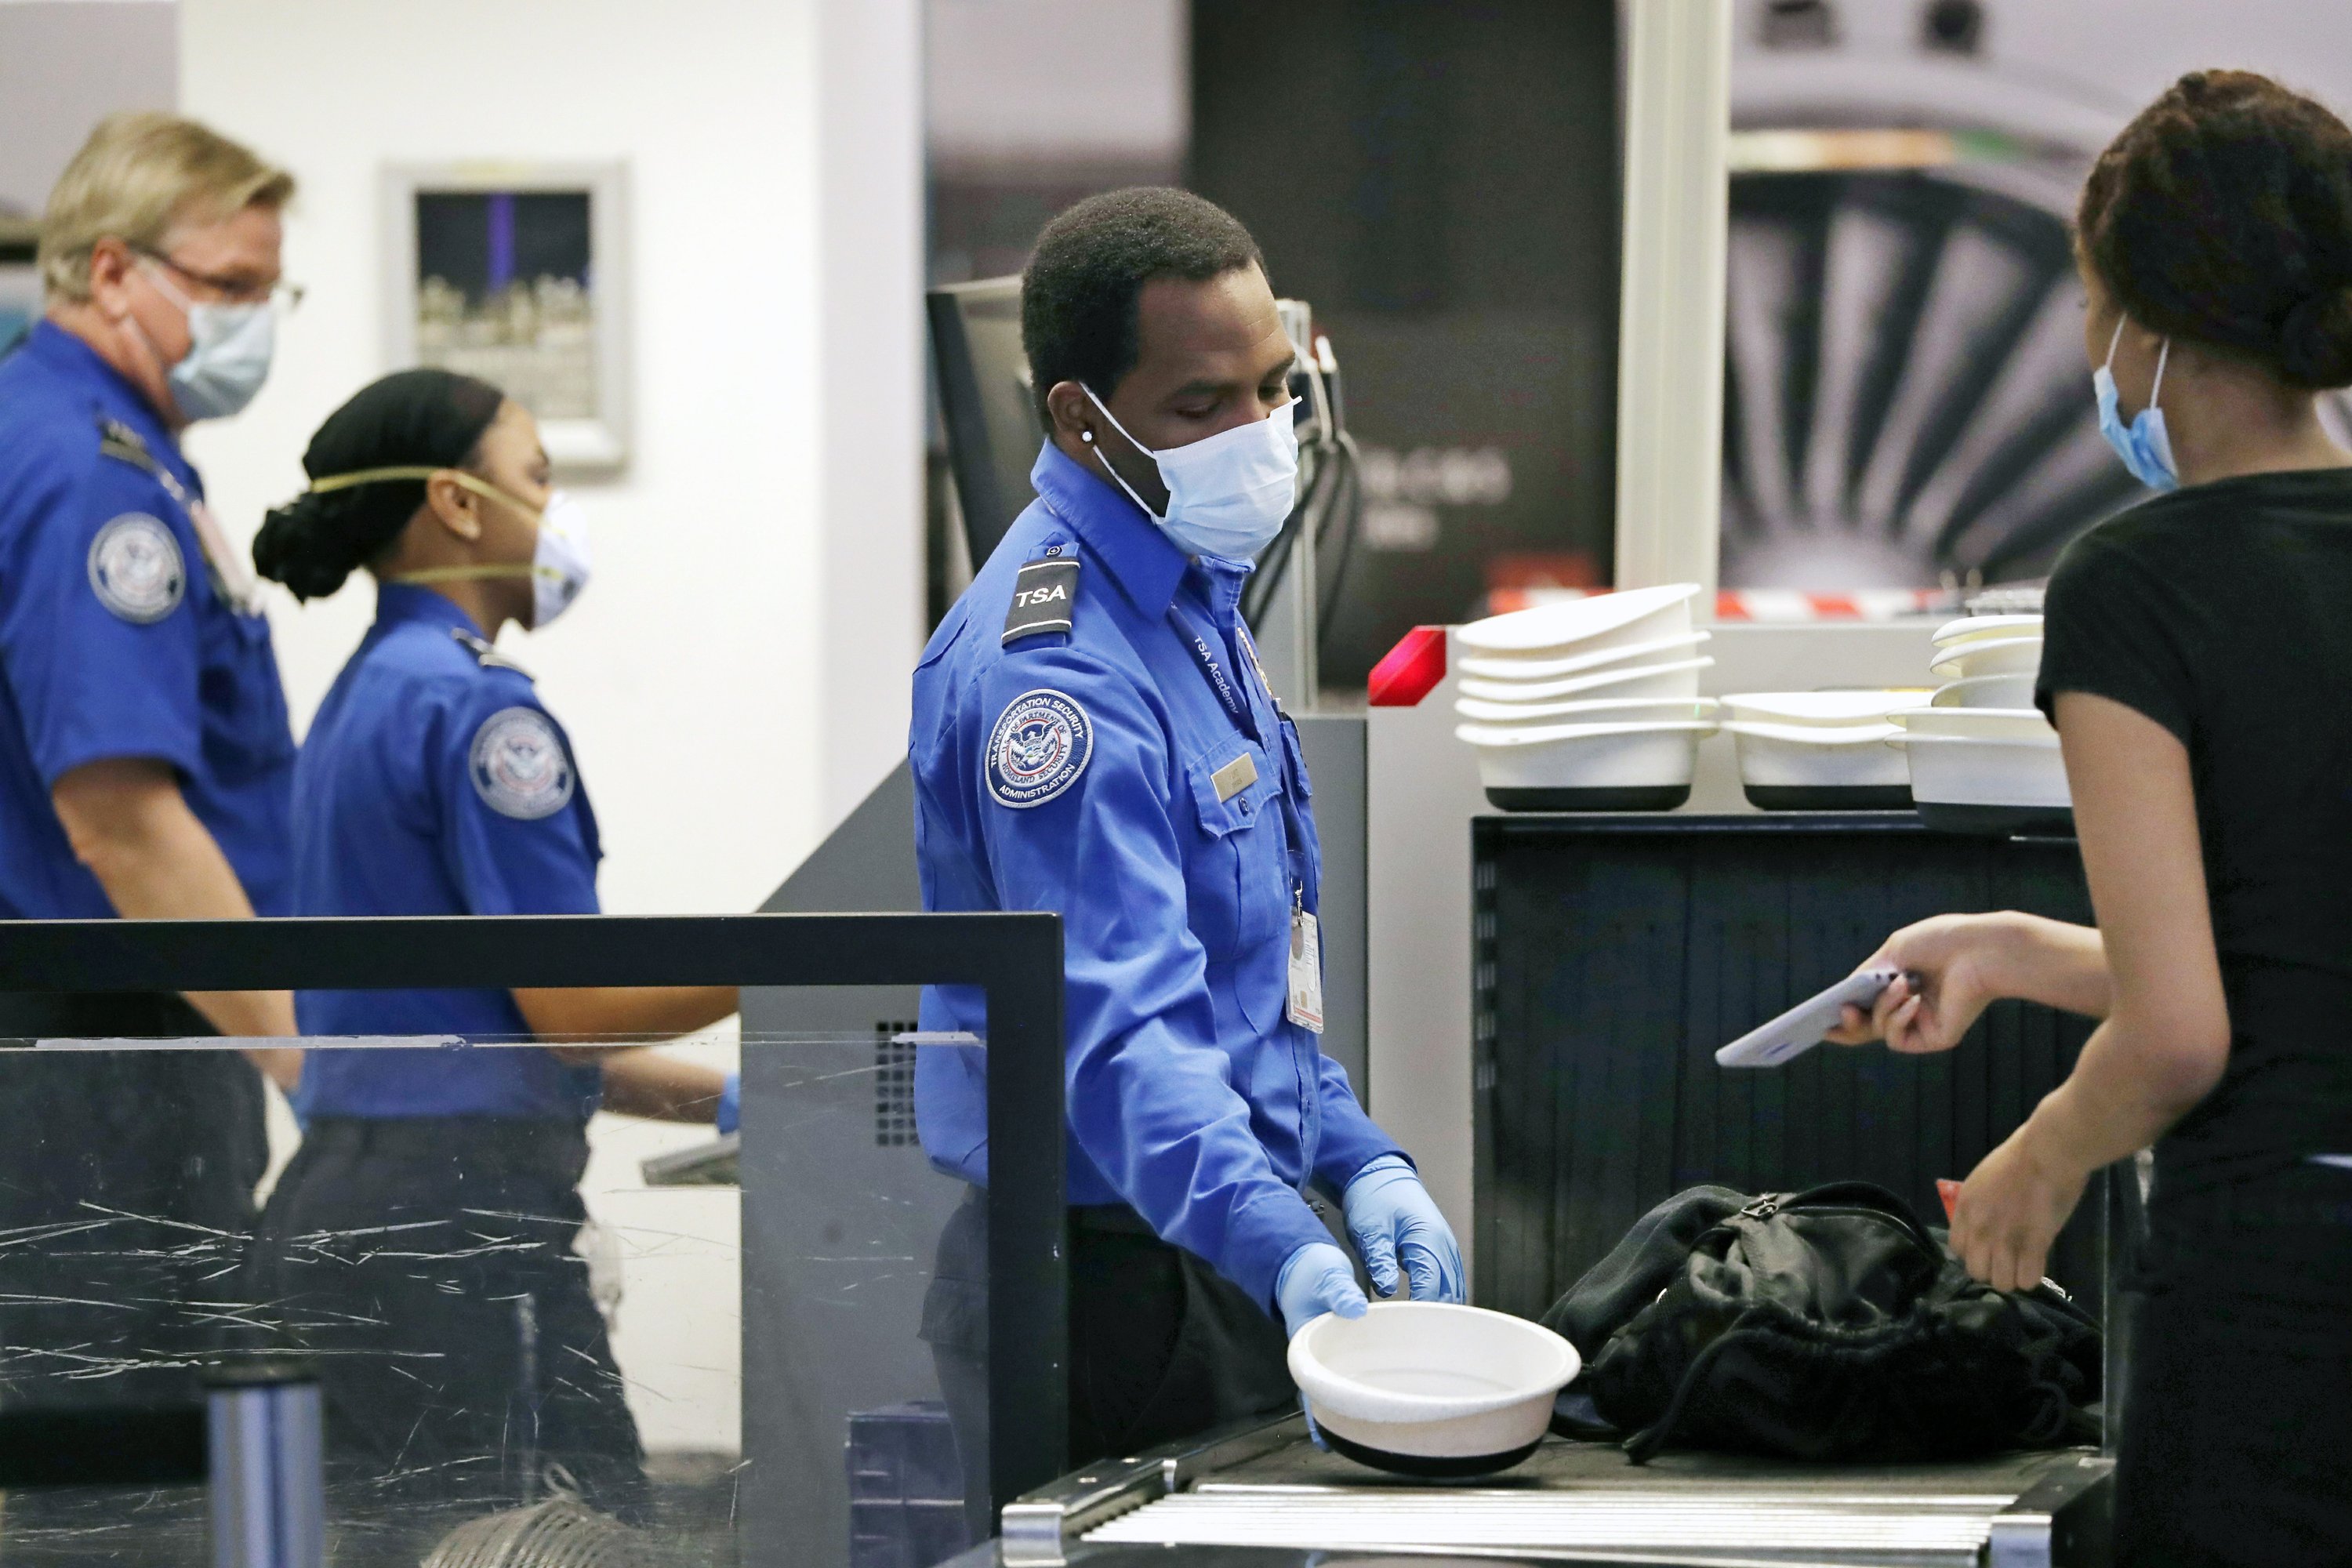 Most major US airlines prohibit weapons in luggage for DC flights